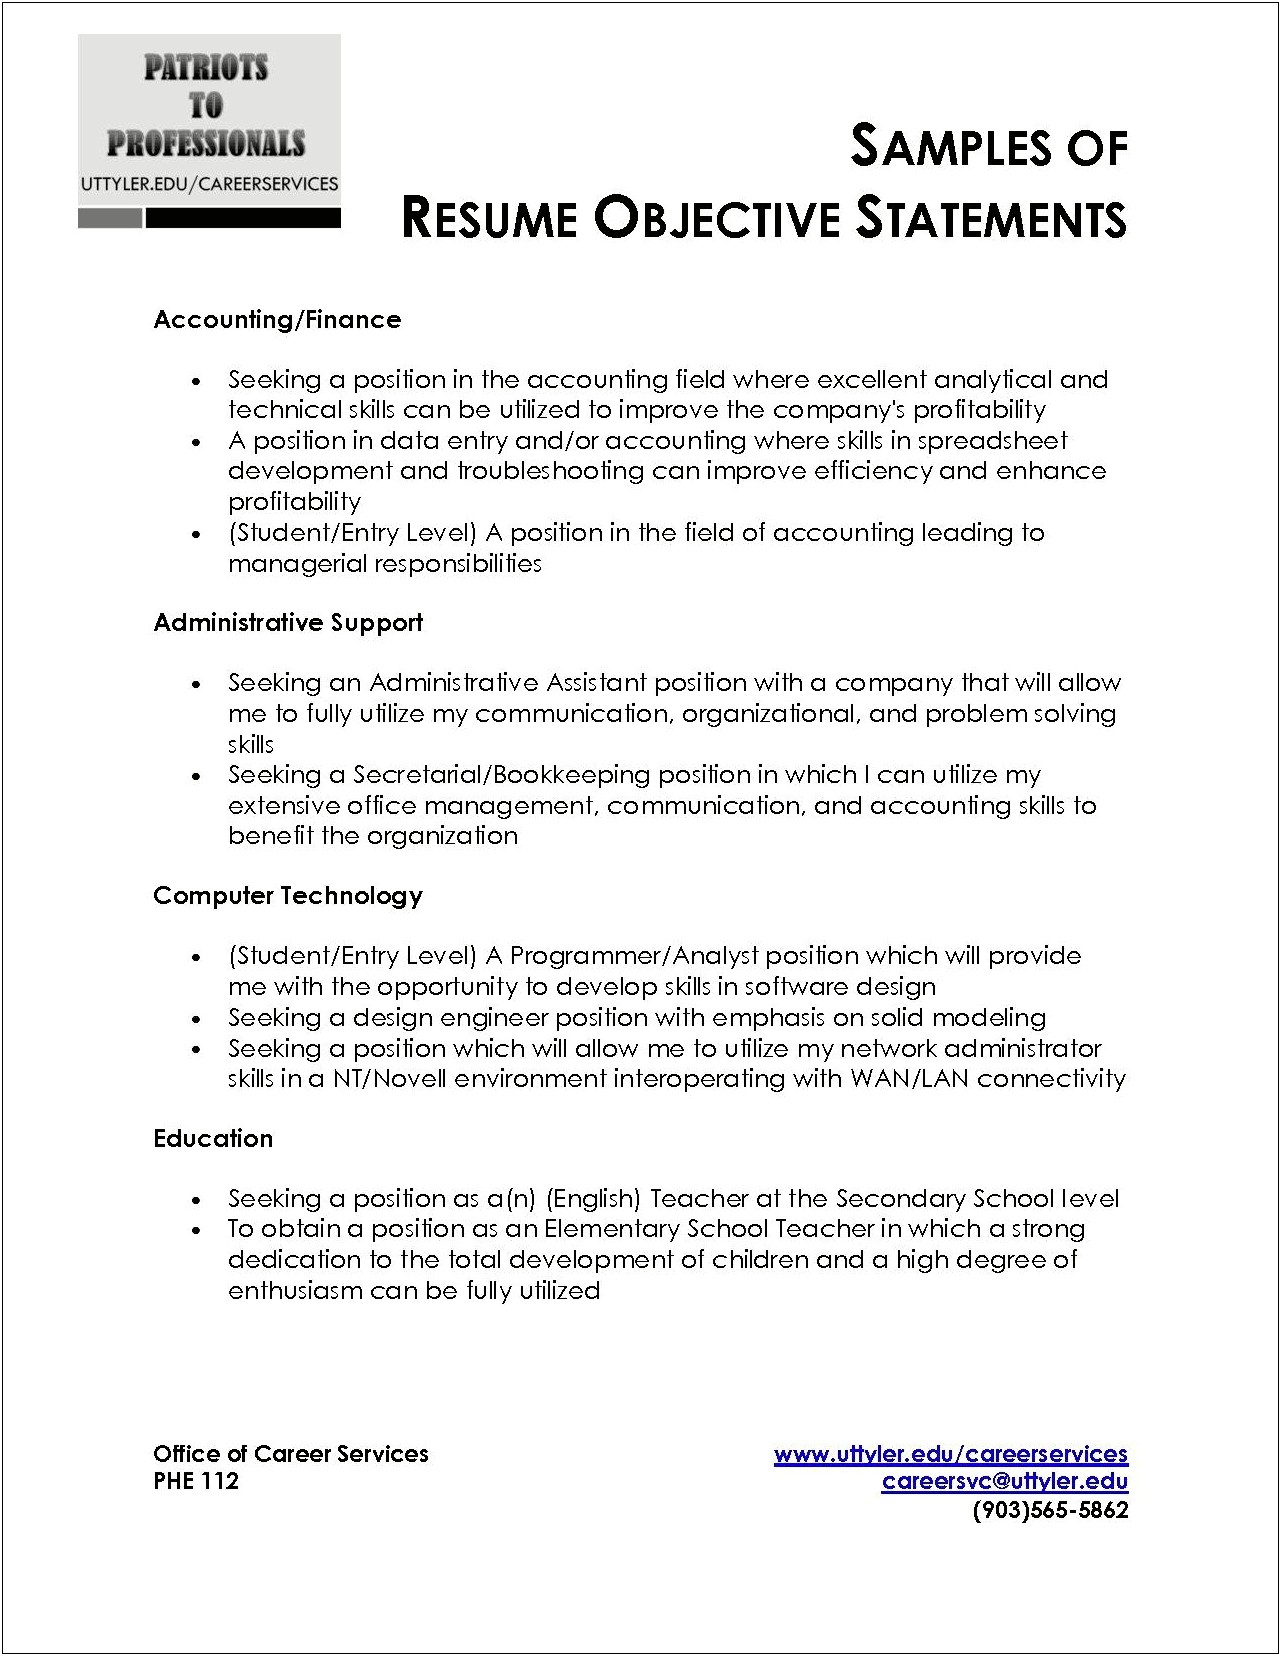 Example Of An Objective Statement In A Resume